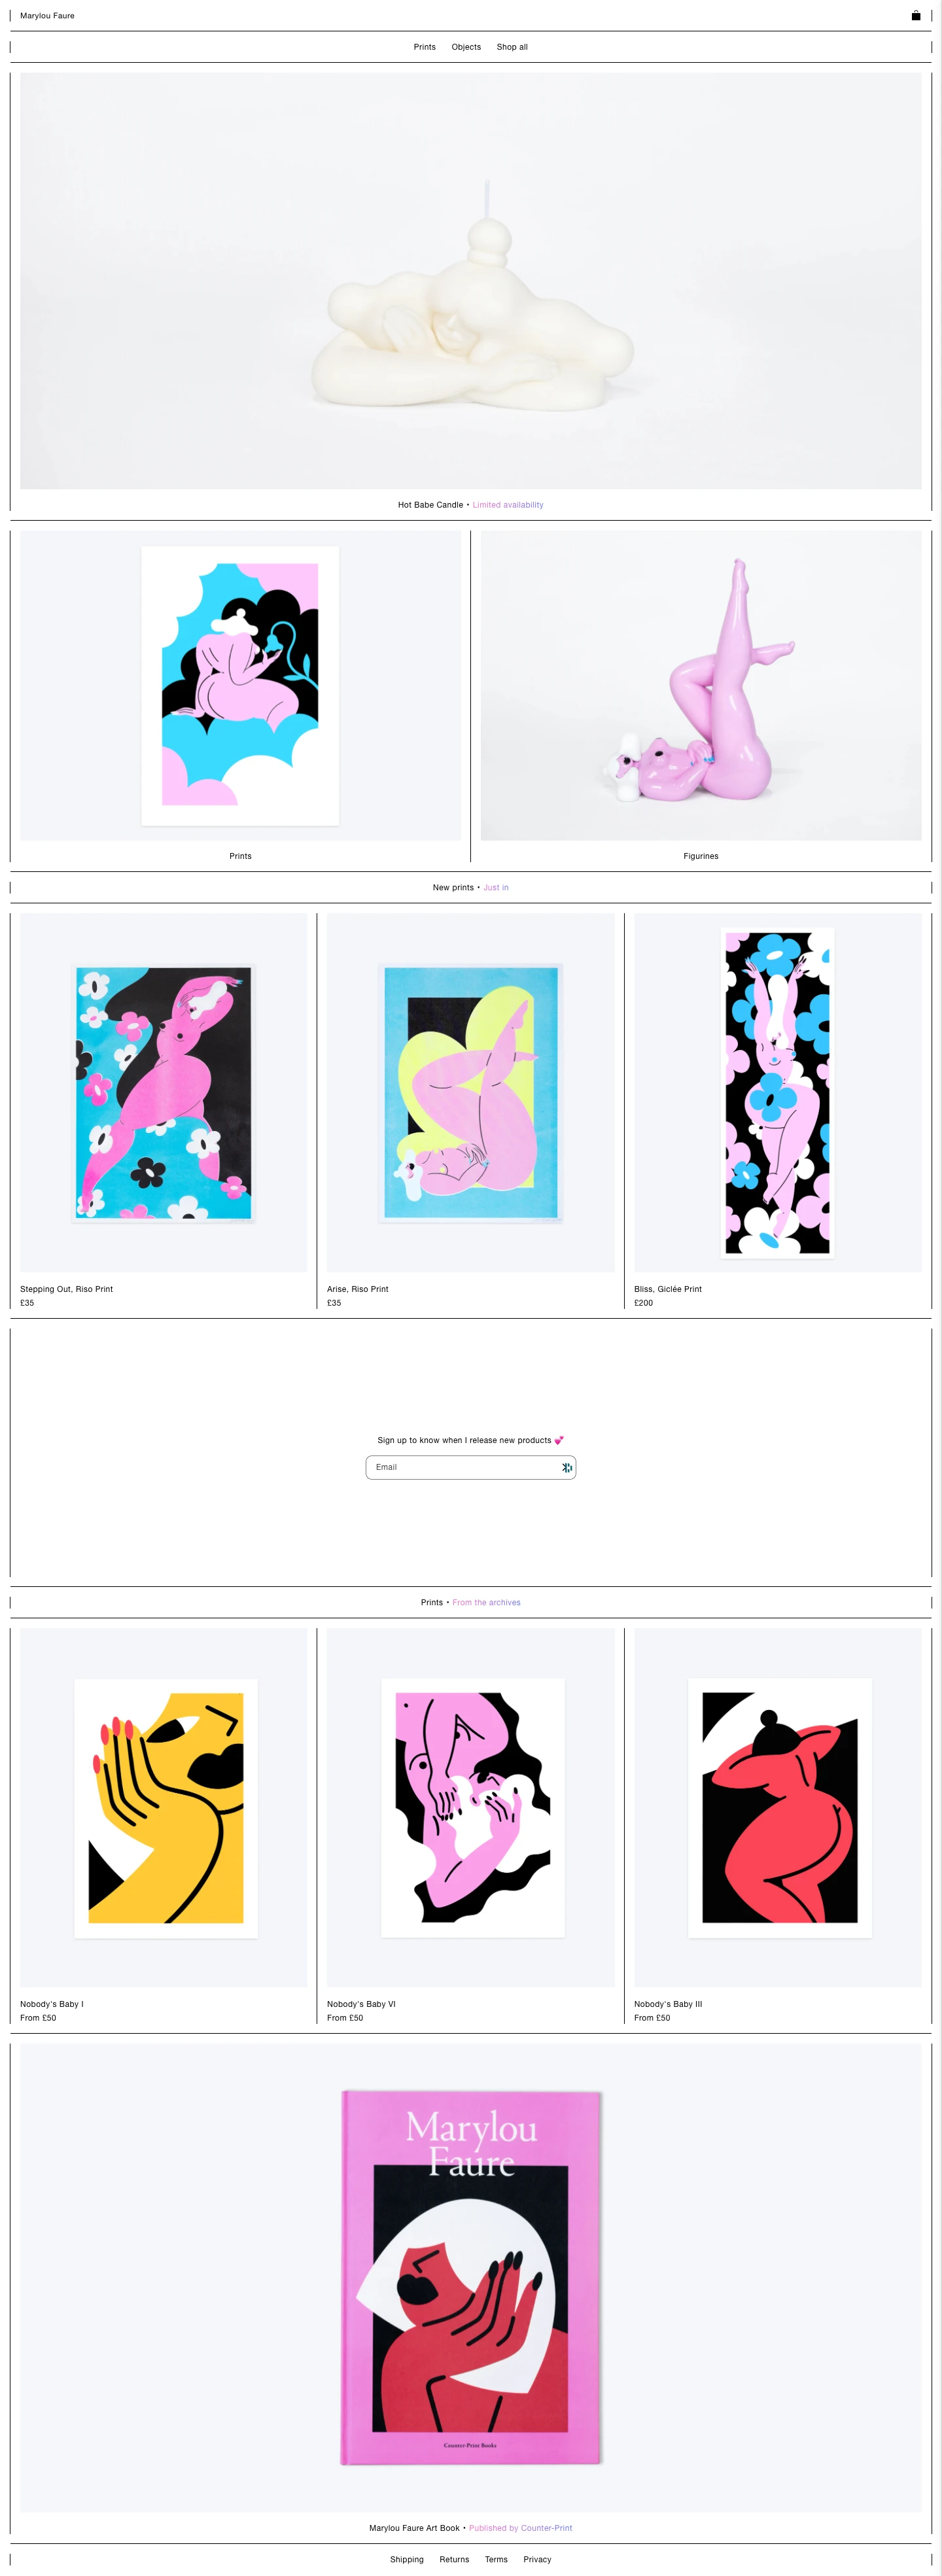 Marylou Faure Landing Page Example: Specialising in character design, bold colours and graphic compositions, French Illustrator and Artist, Marylou Faure aspires to create artwork that invokes joy with her cheeky and playful style.